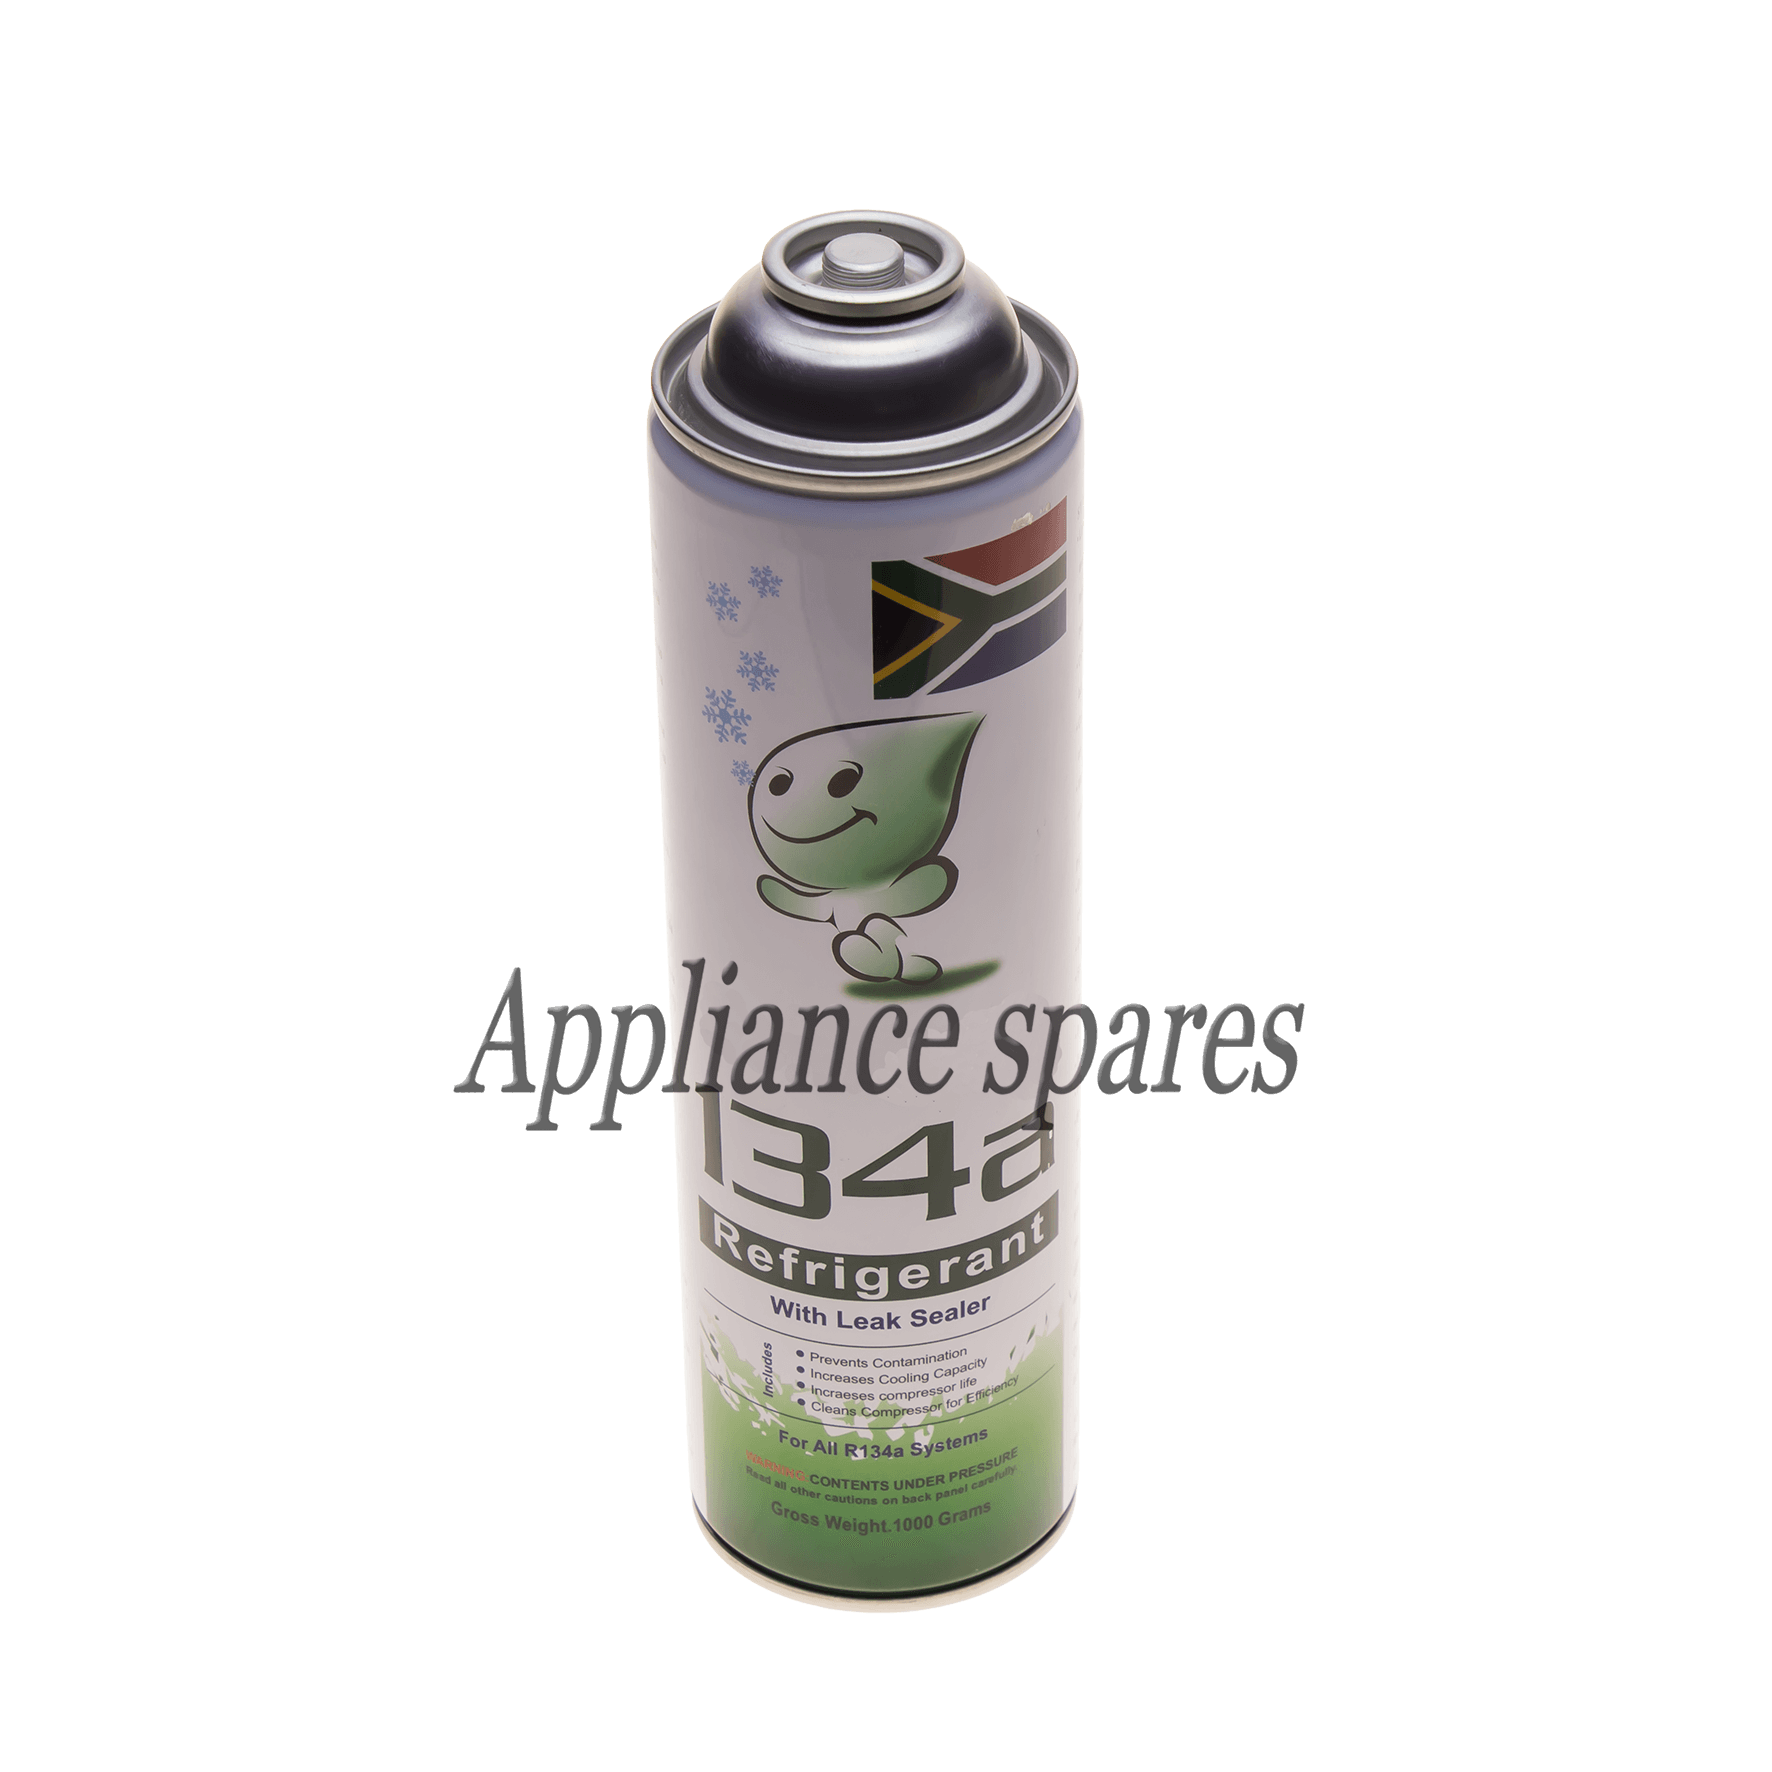 R134a Canister with Leak Sealer